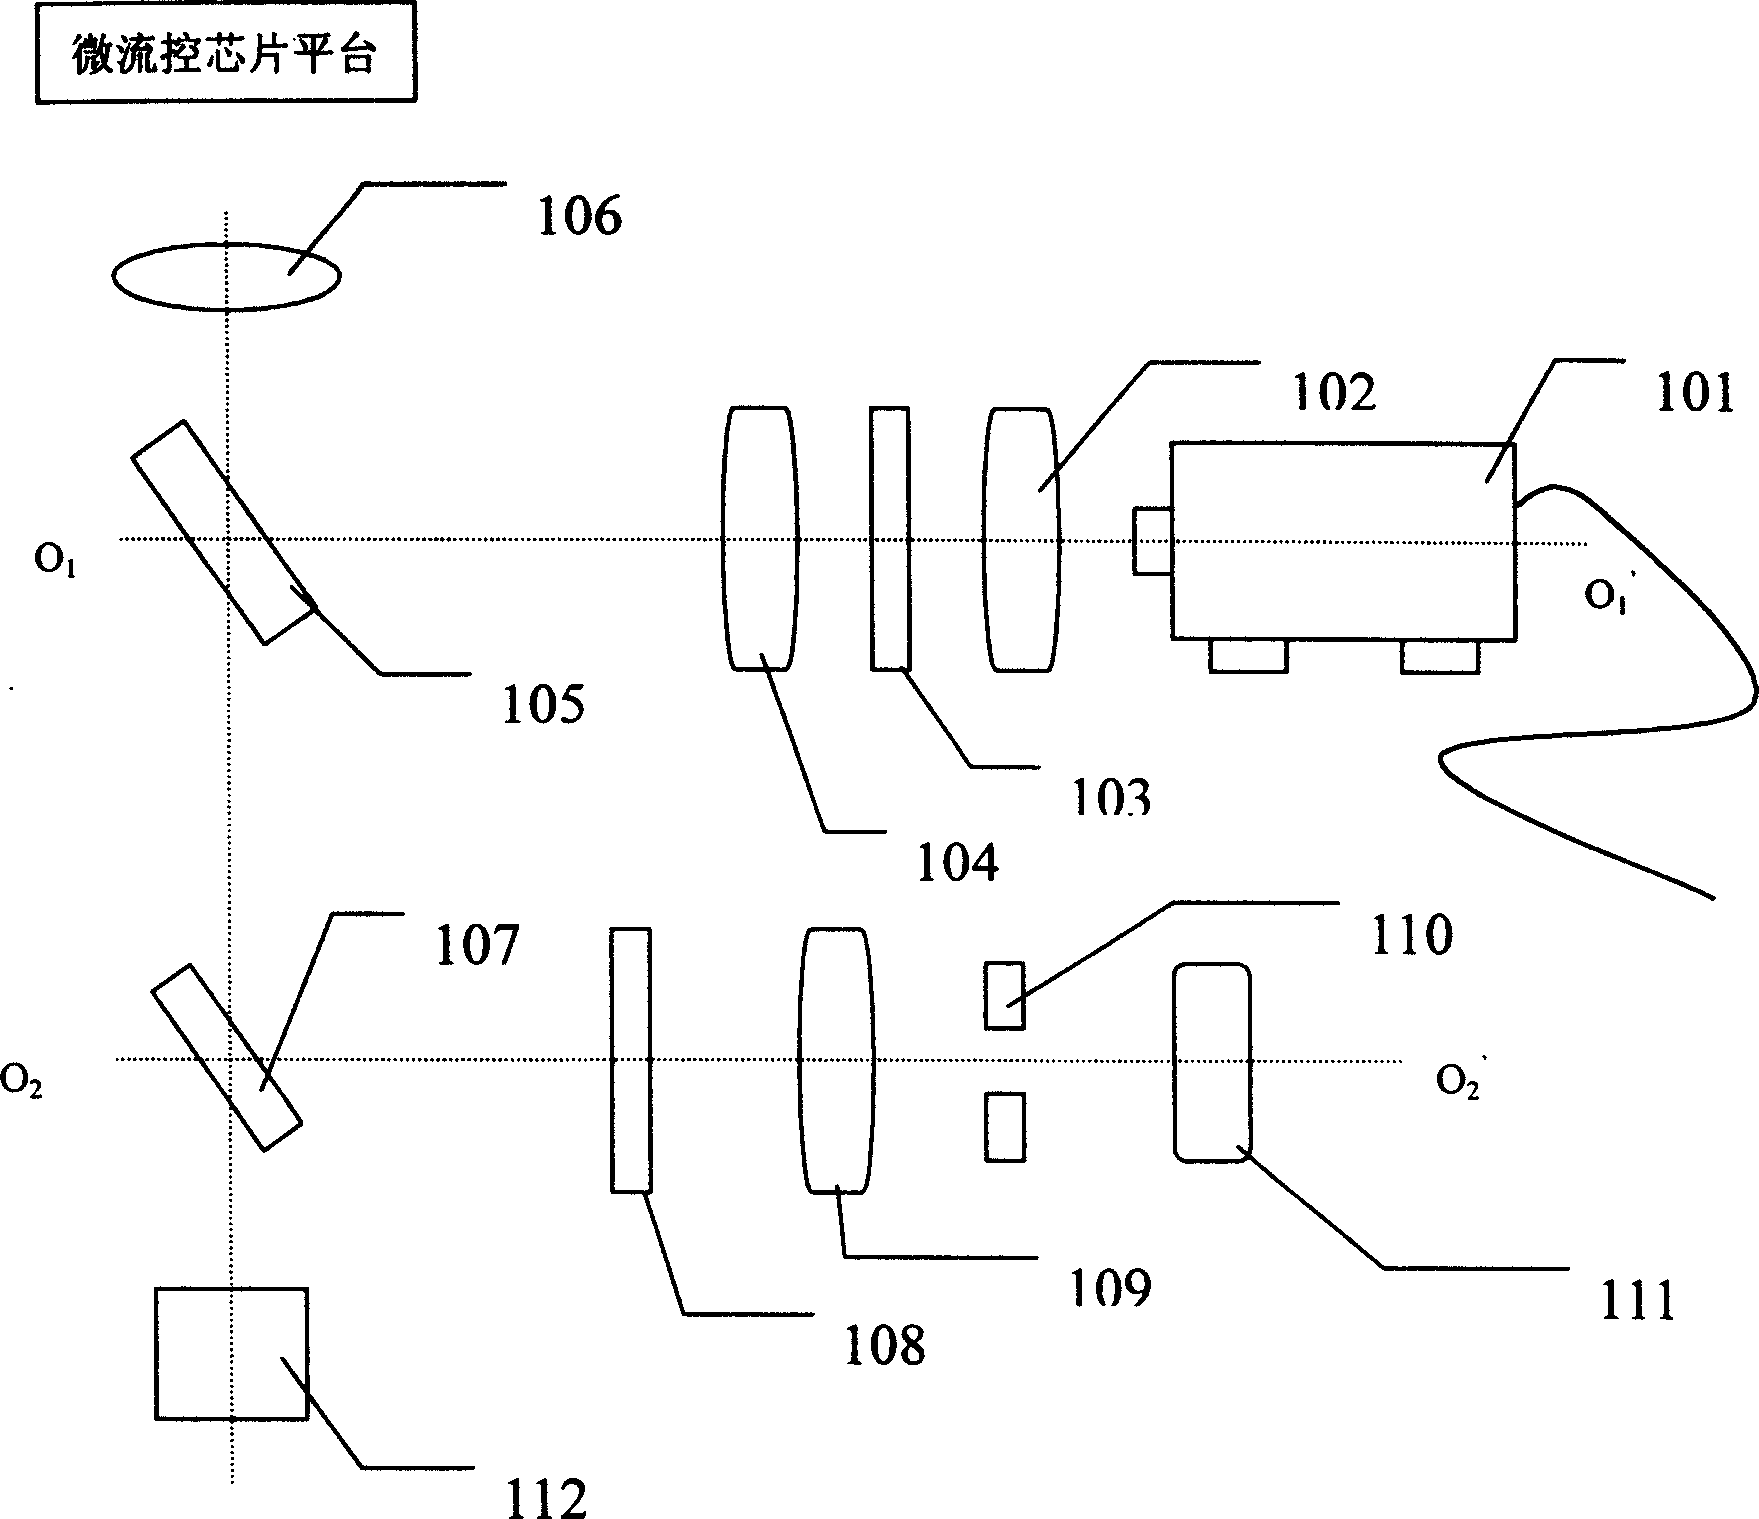 Fluorescence detection optical device with microflow control chip